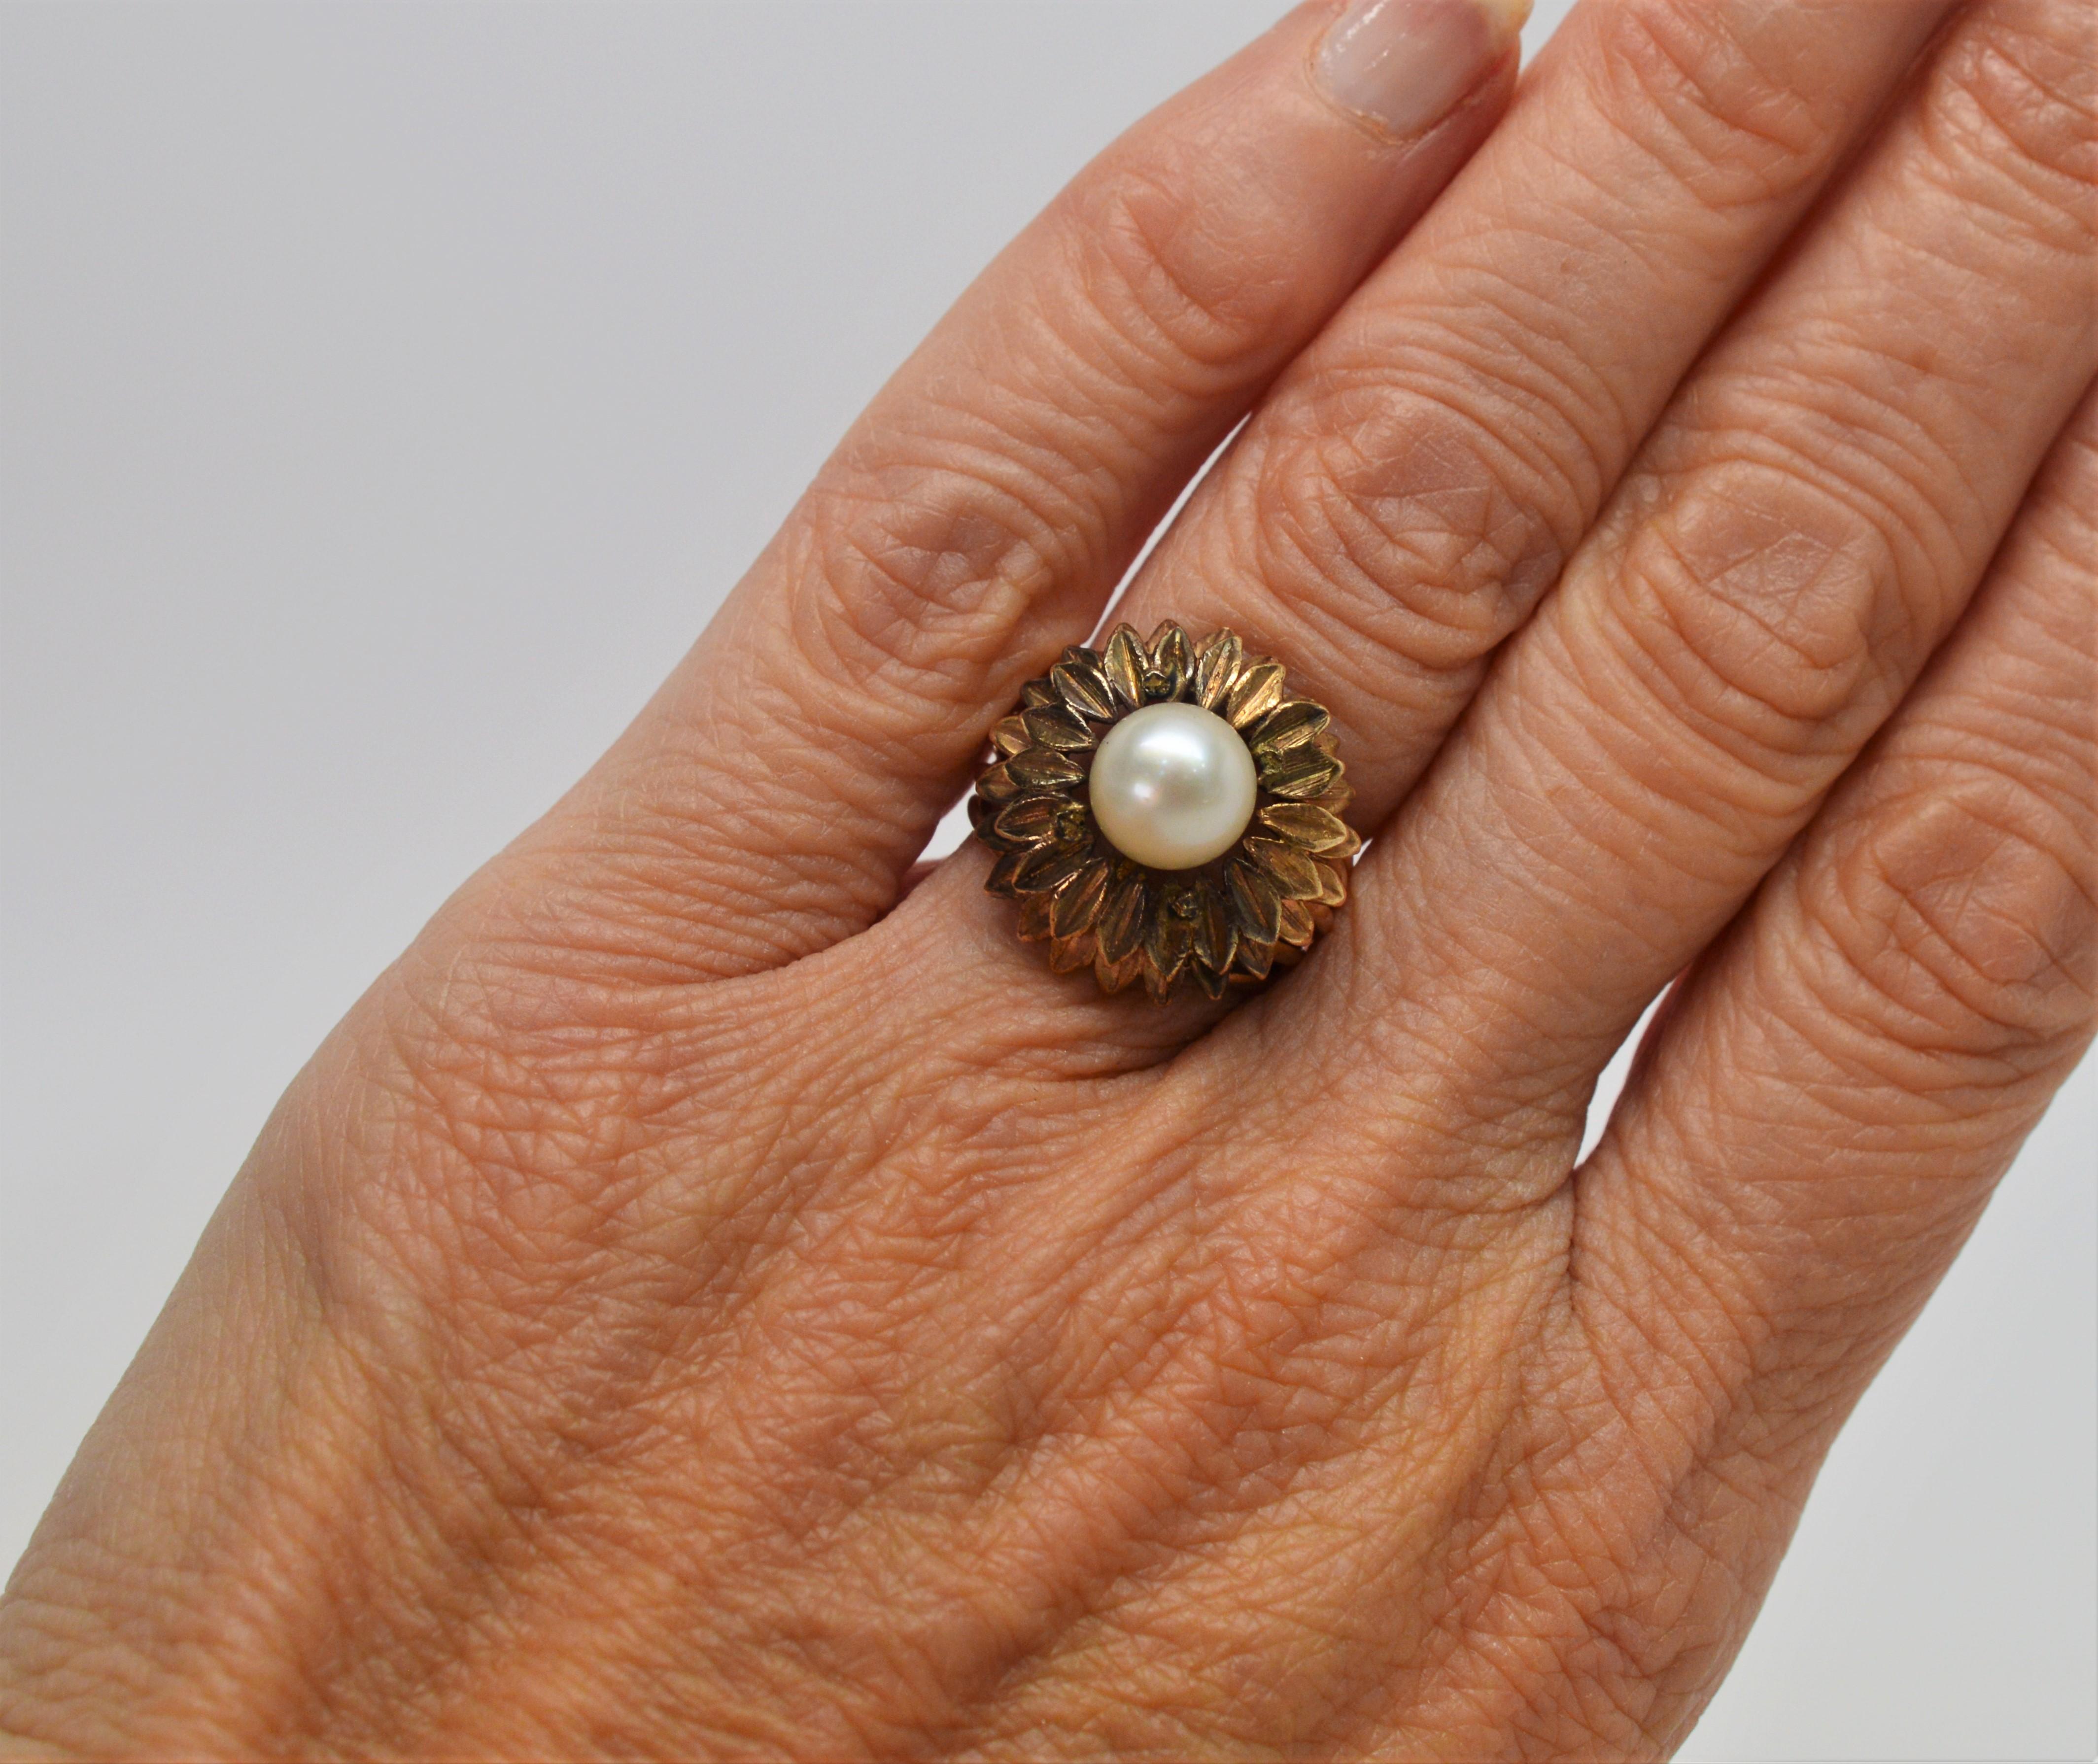 Women's Antique Gold Floral Burst Ring with Pearl